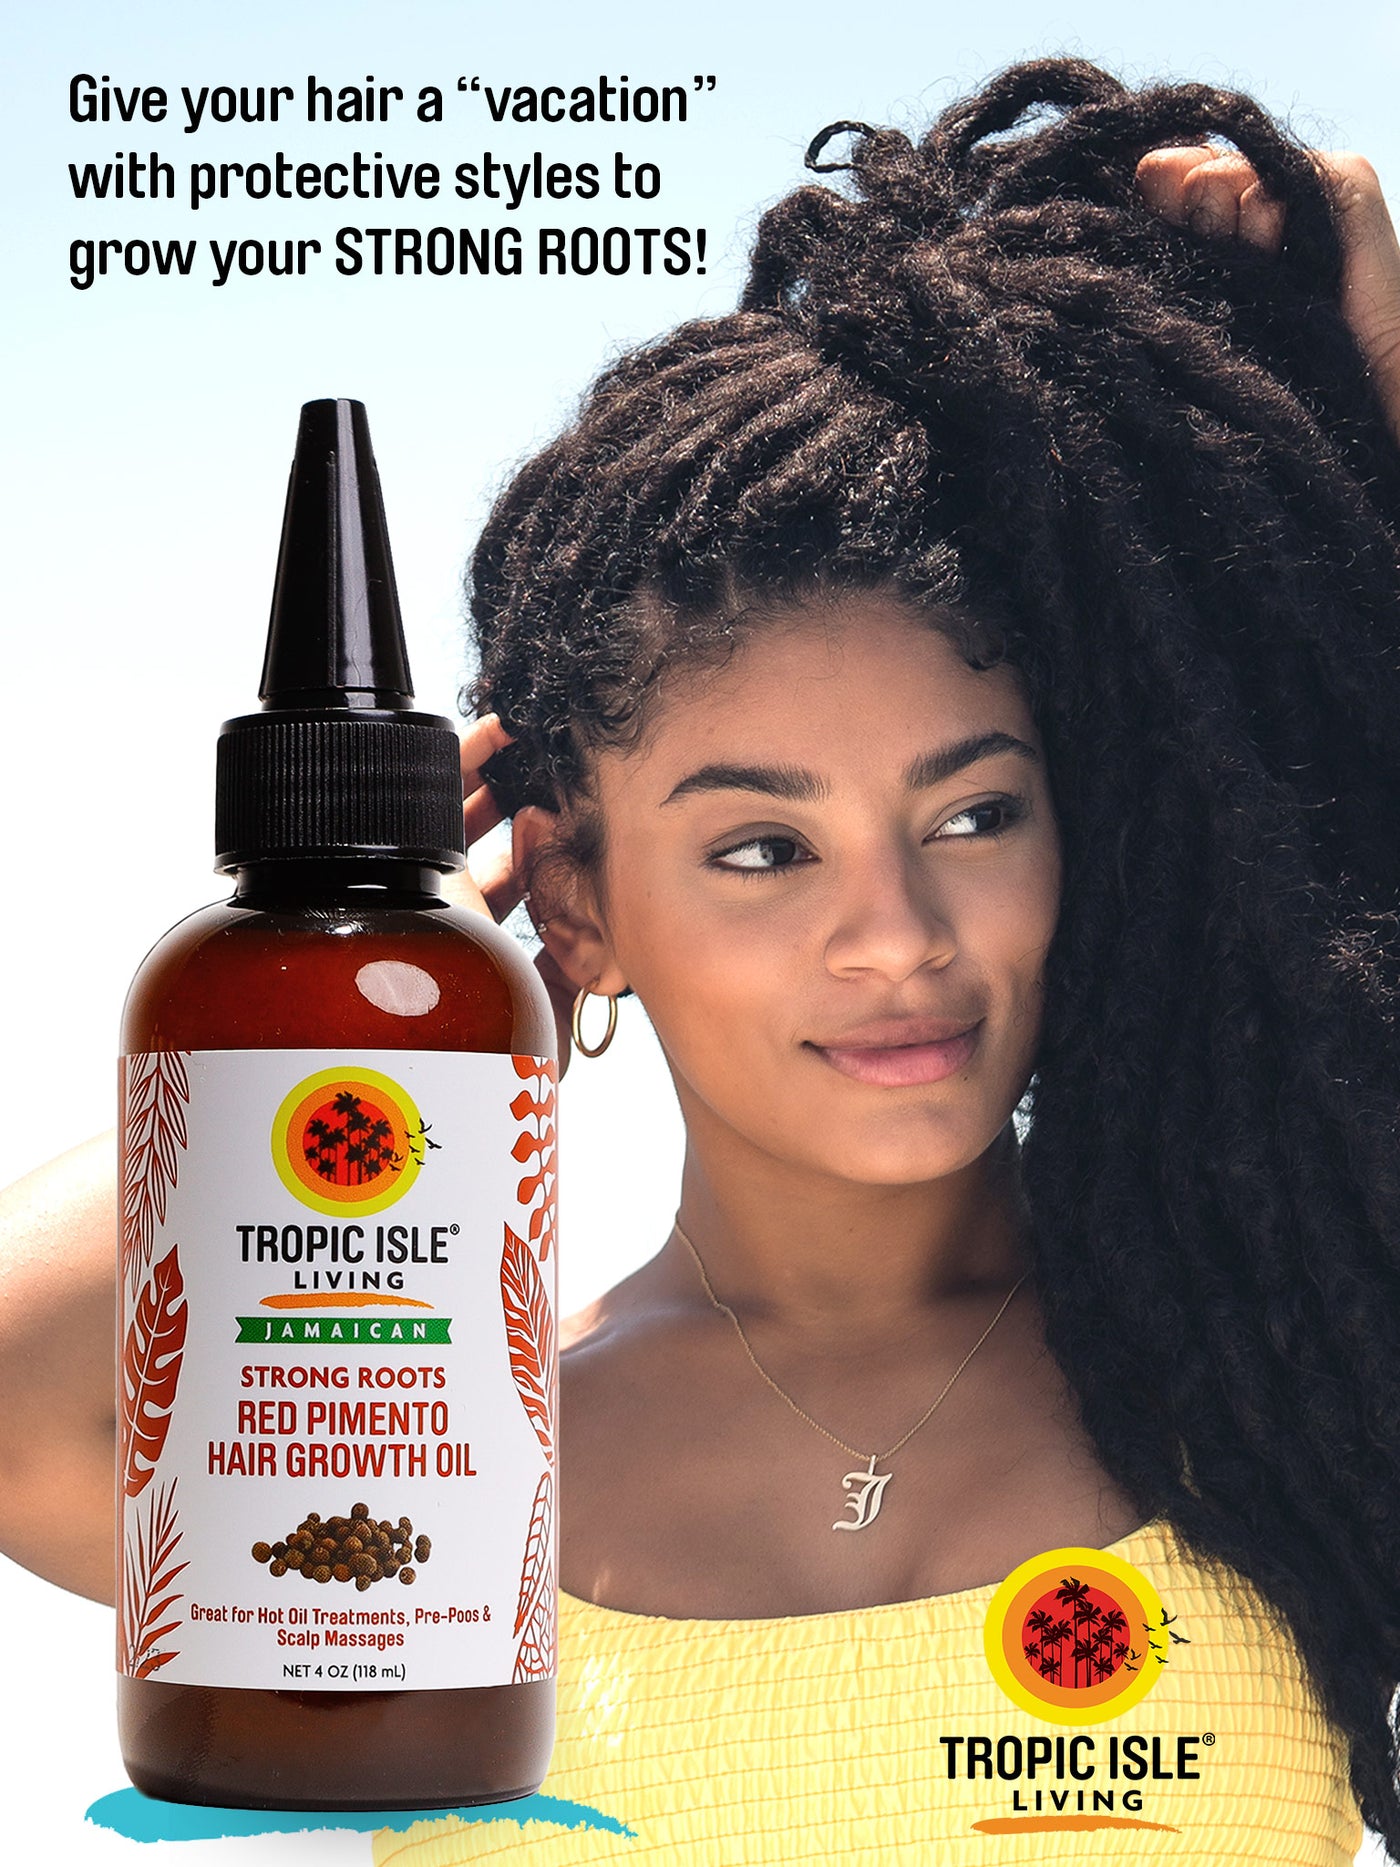 Organic hair growth oil made with clean ingredients – Her Roots